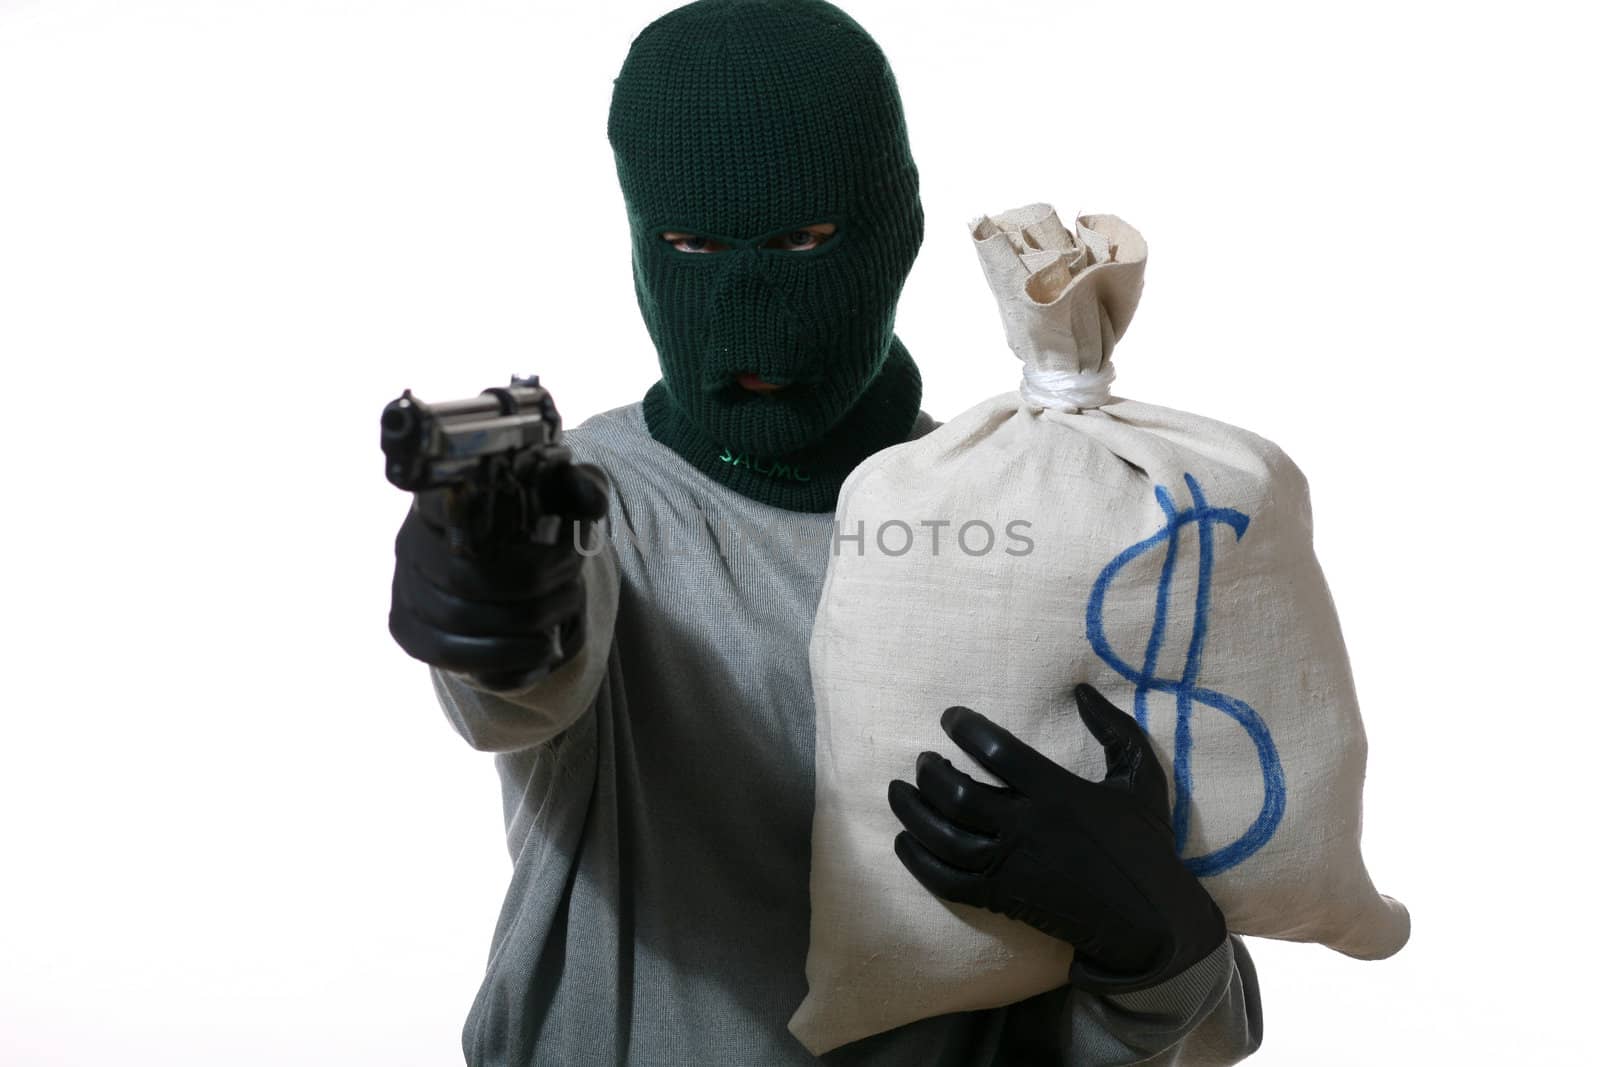 An image of a man in mask with gun and bag